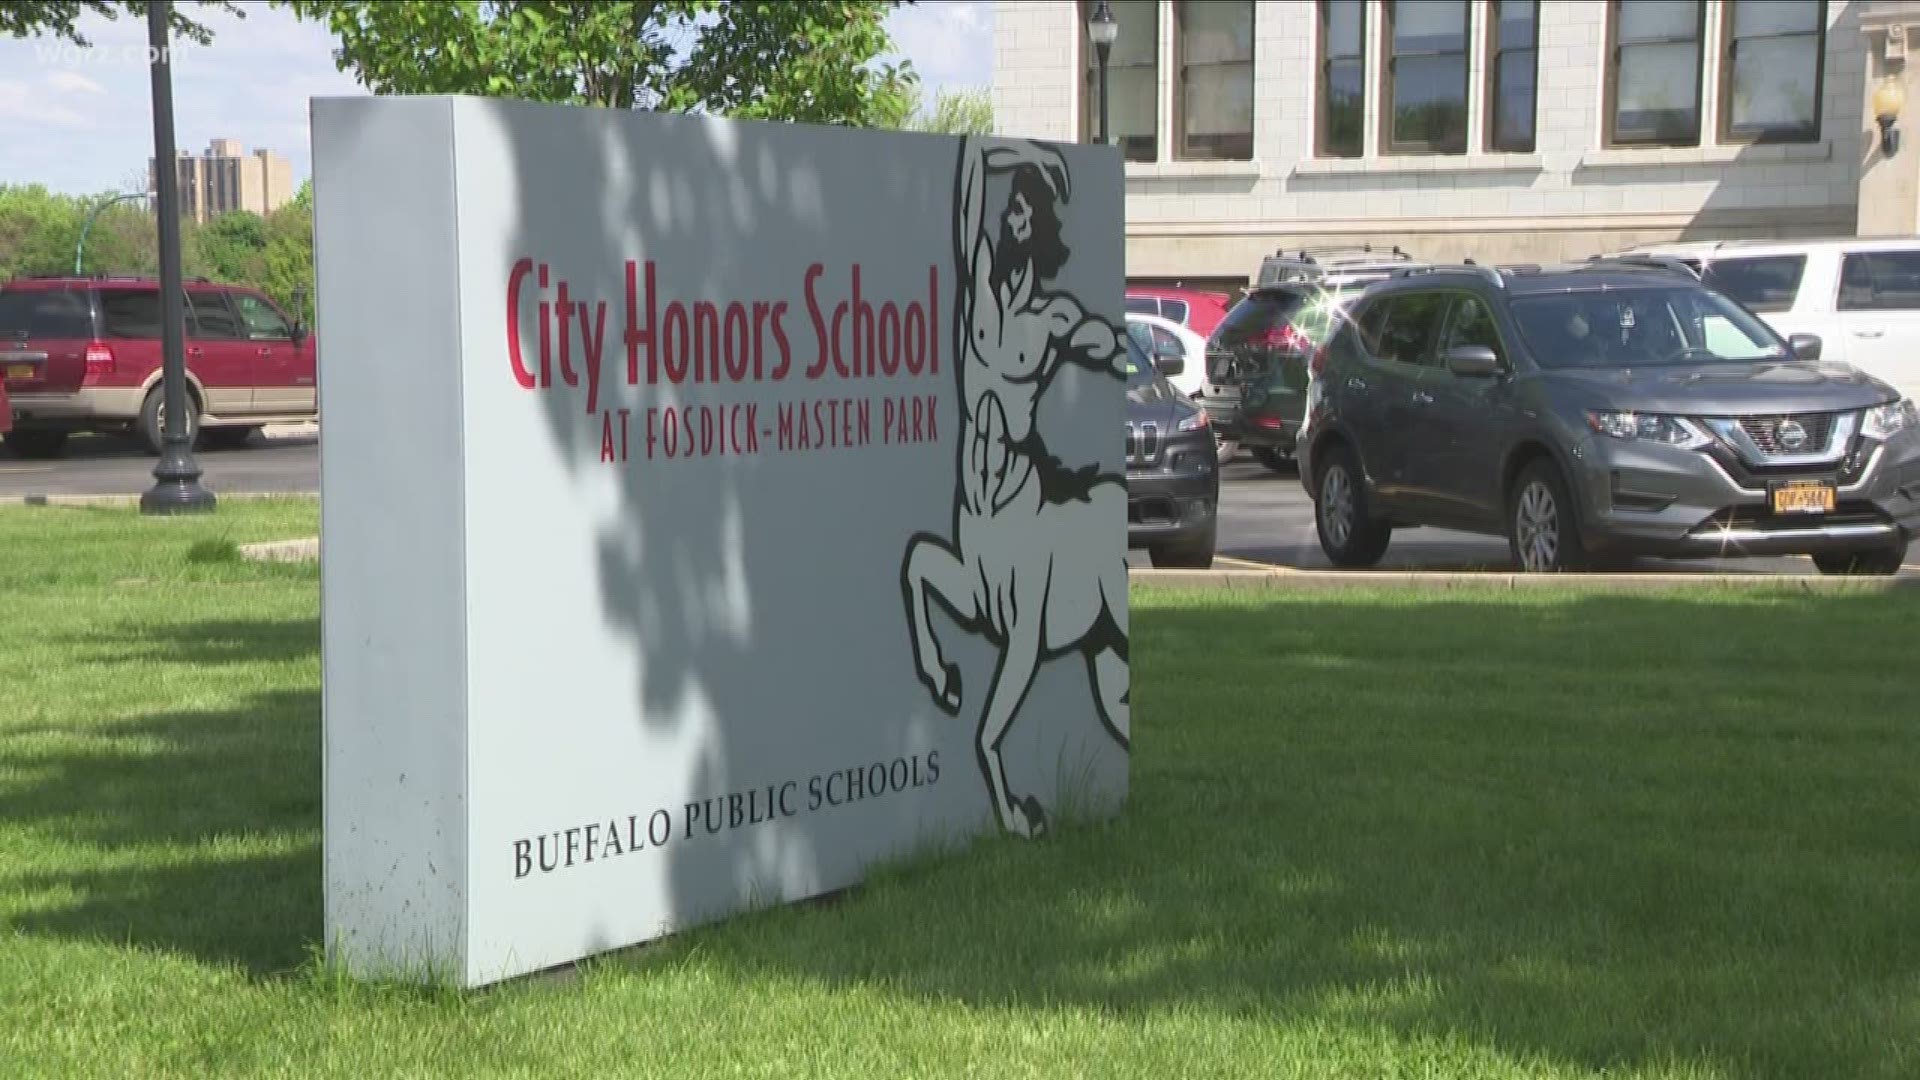 AND THE TOP HIGH SCHOOL... IS CITY HONORS -- IN BUFFALO.